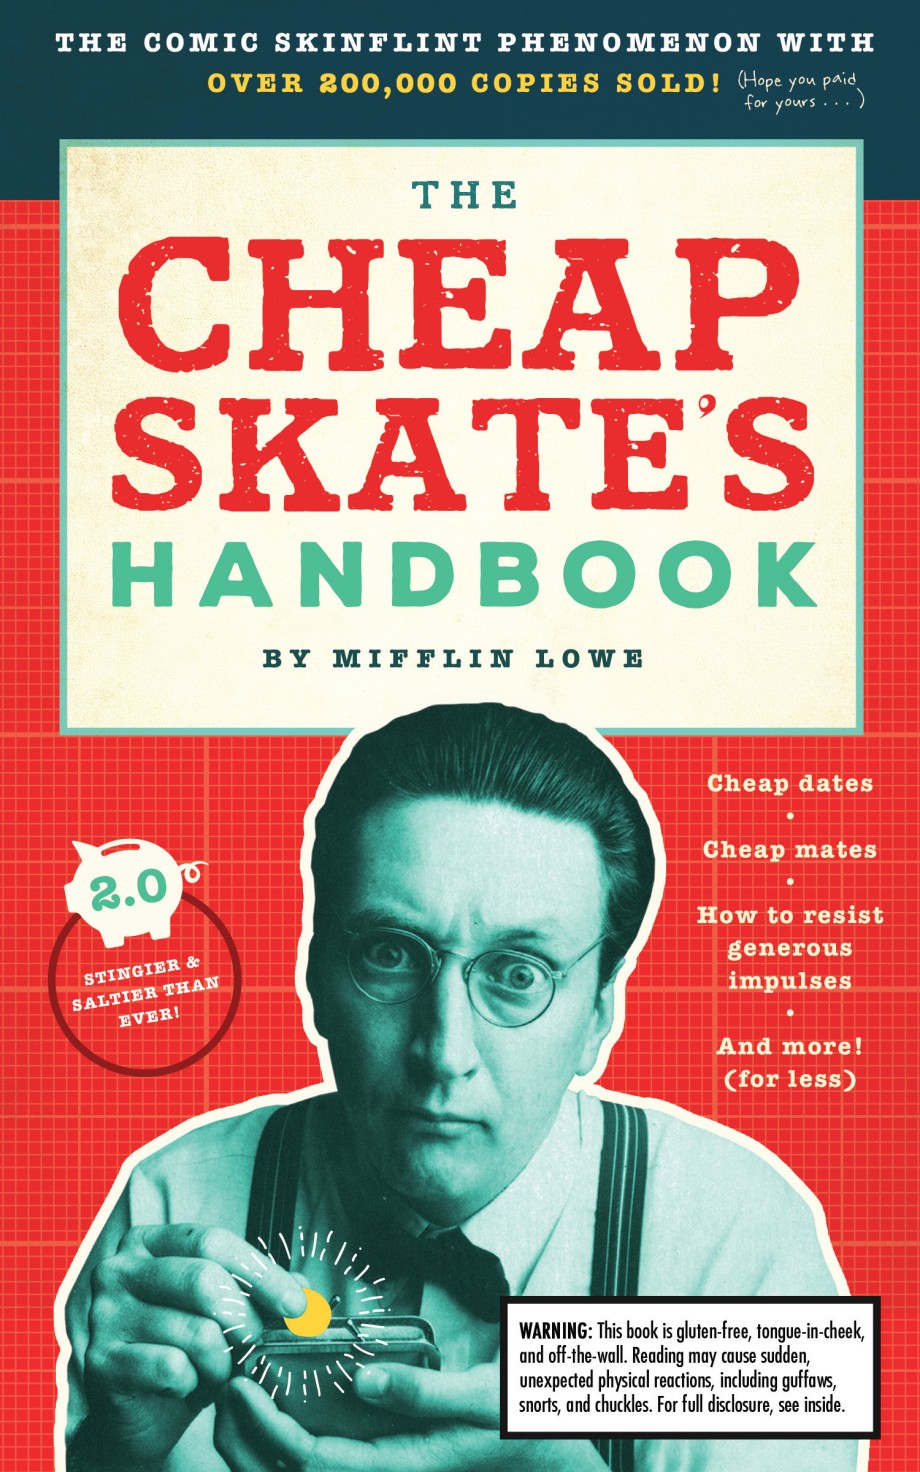 Cheapskate's Handbook A Guide to the Subtleties, Intricacies, and Pleasures of Being a Tightwad